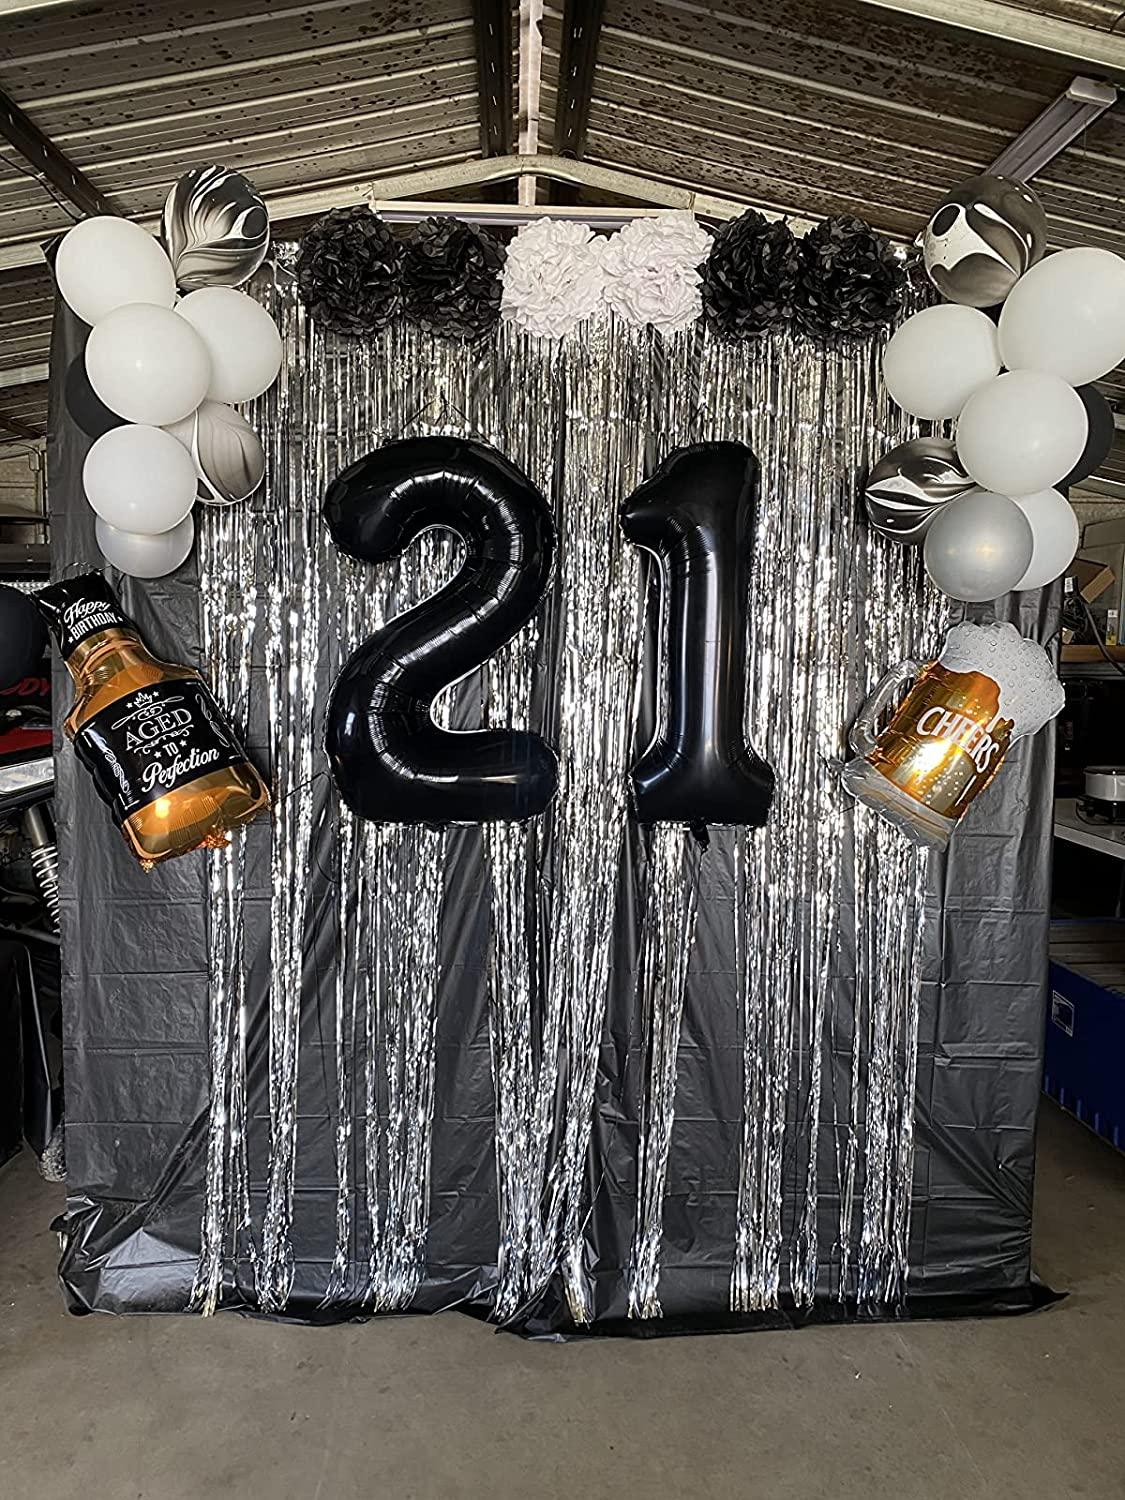 40inch Jumbo Black 21 Number Balloons for 21st Birthday Decorations He – If you say i do